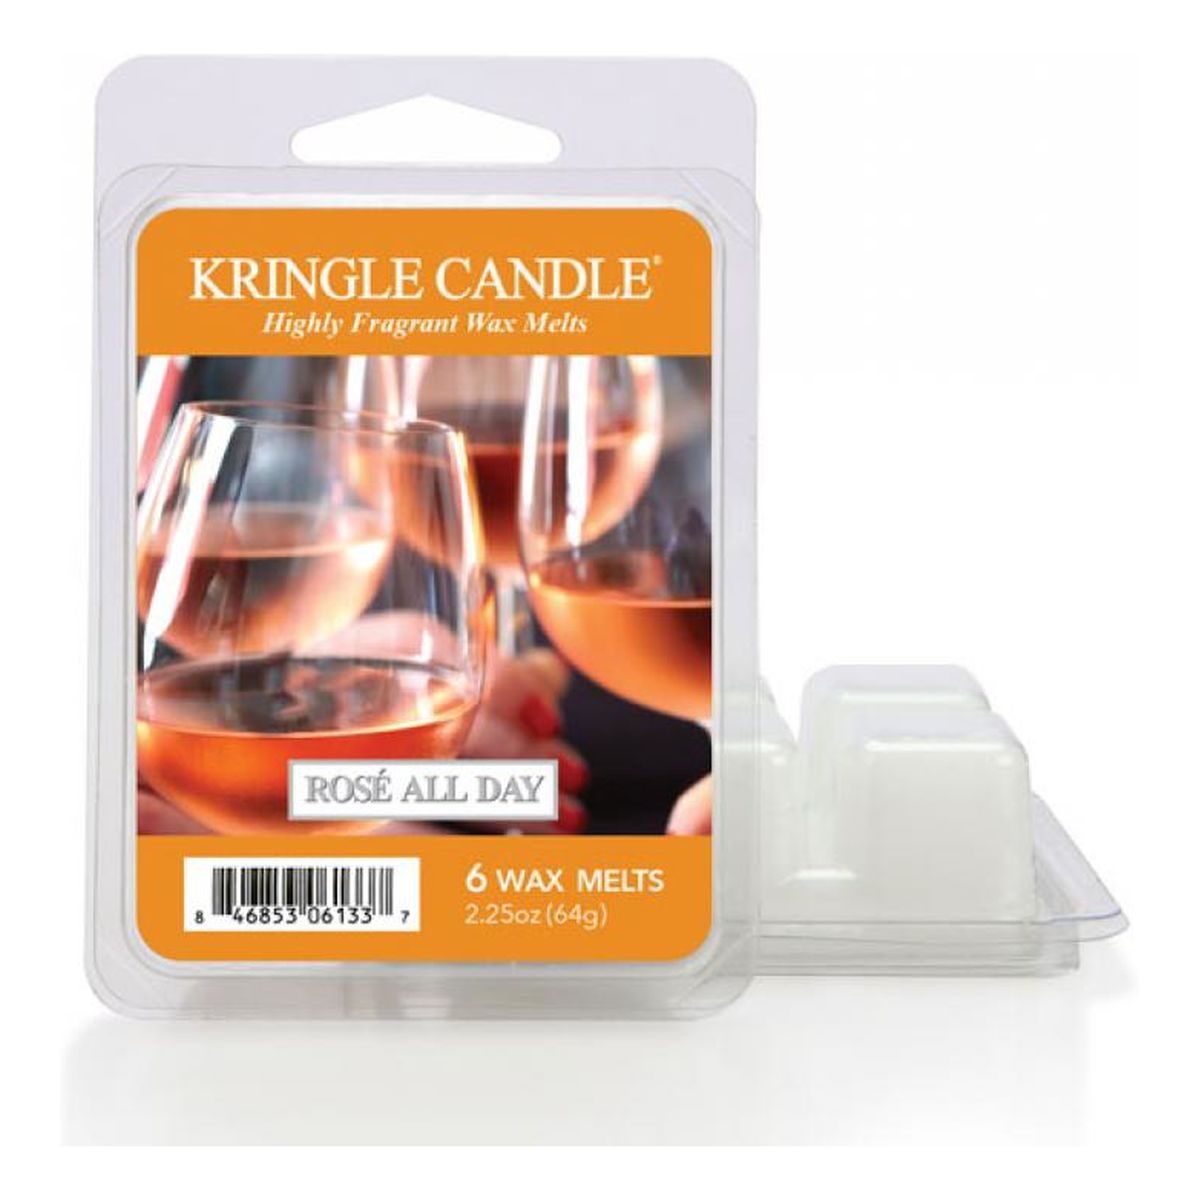 Kringle Candle Wax wosk zapachowy "potpourri" rose all day 64g